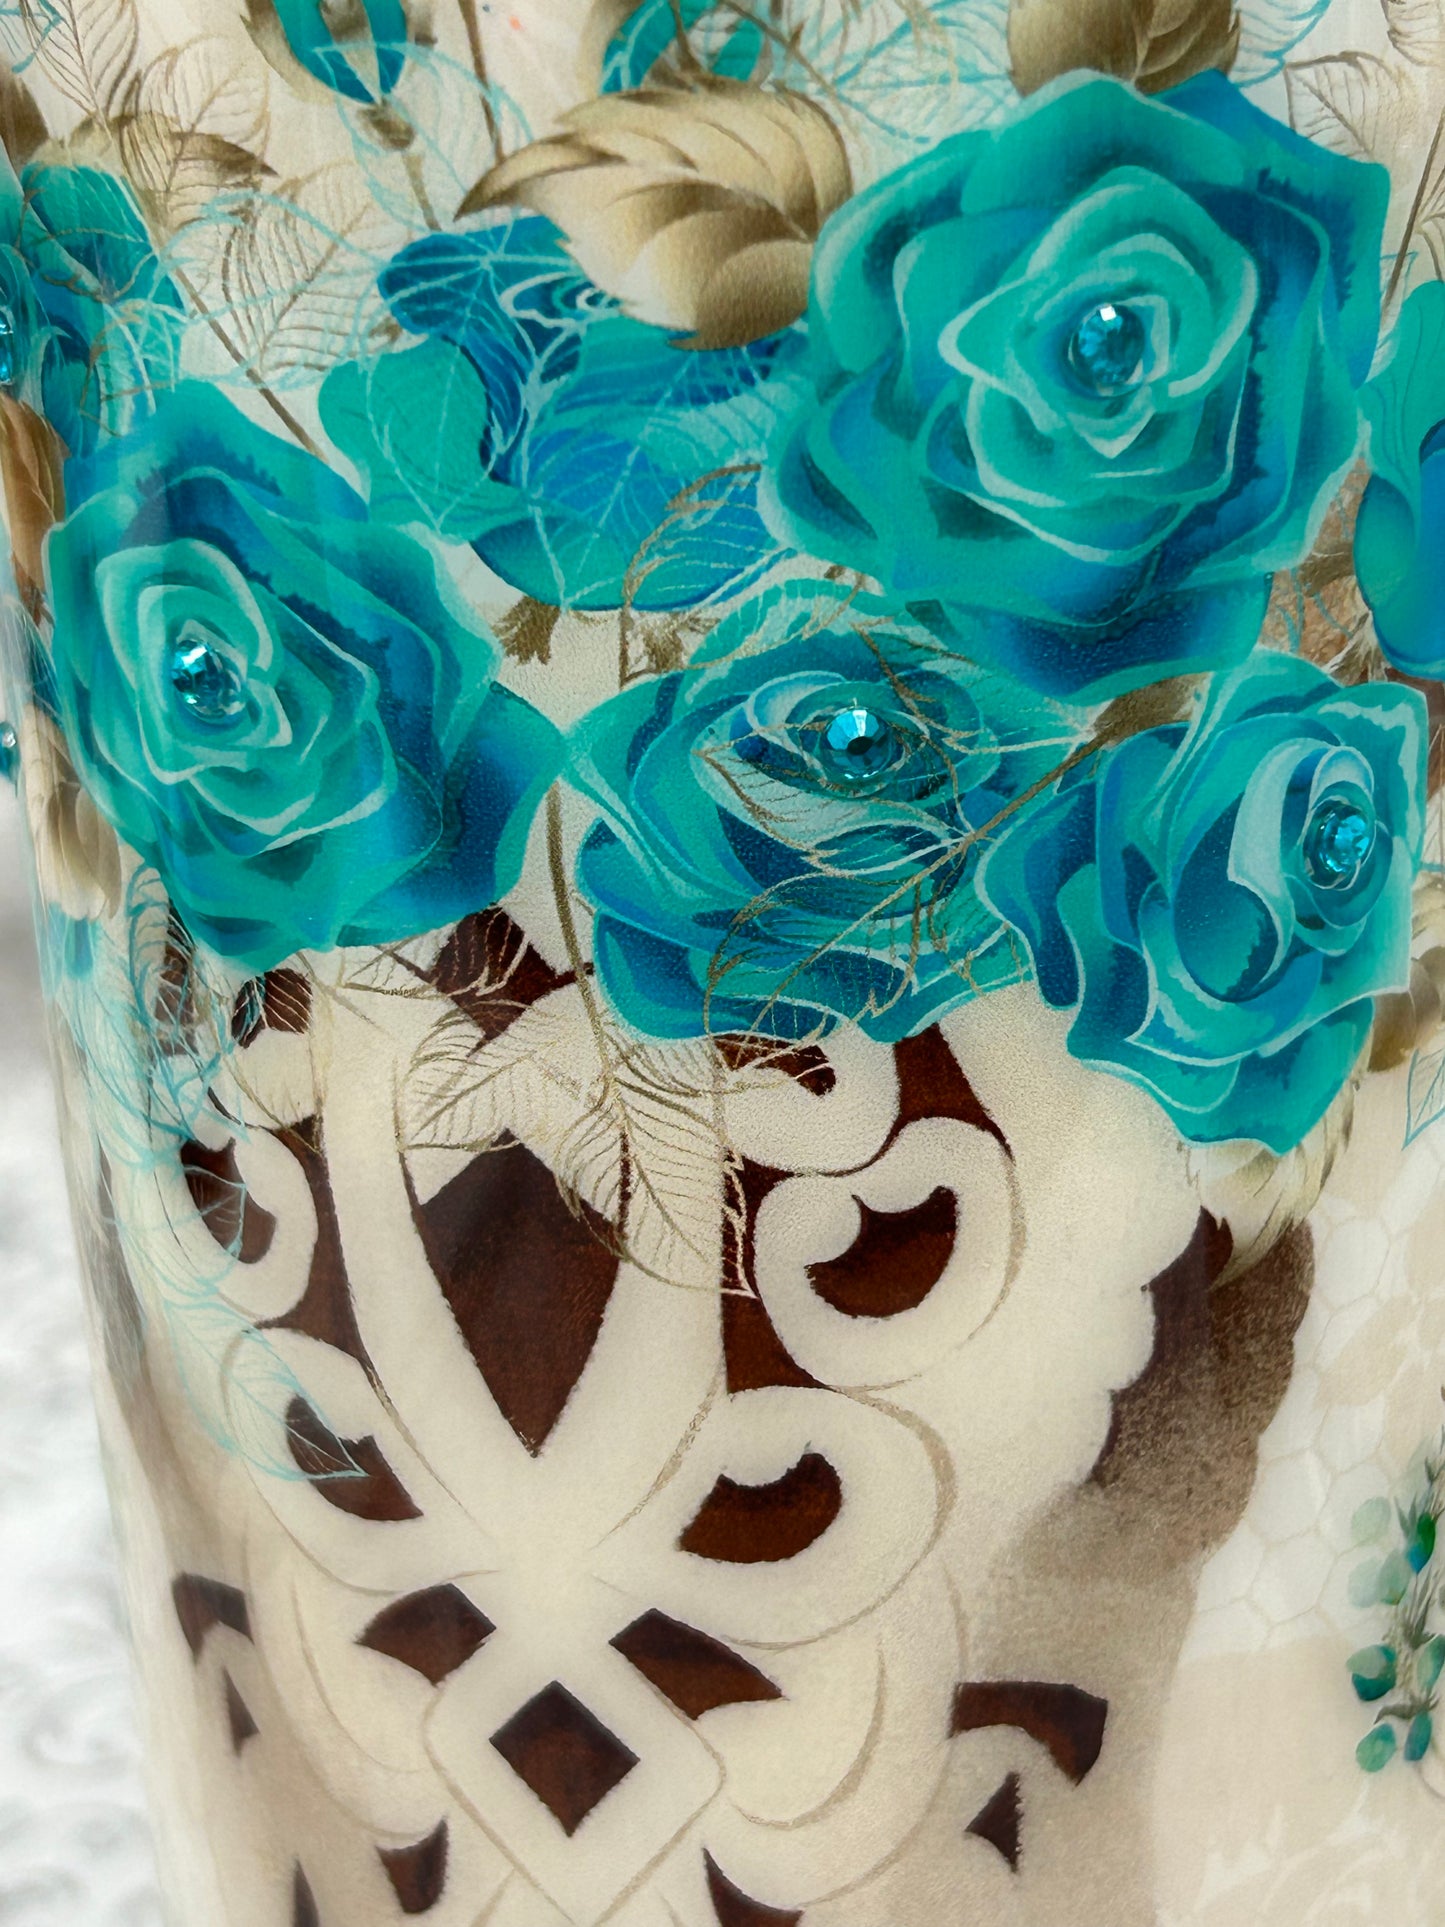 20 oz. BLUE FLORAL STEER SKULL - READY TO SHIP